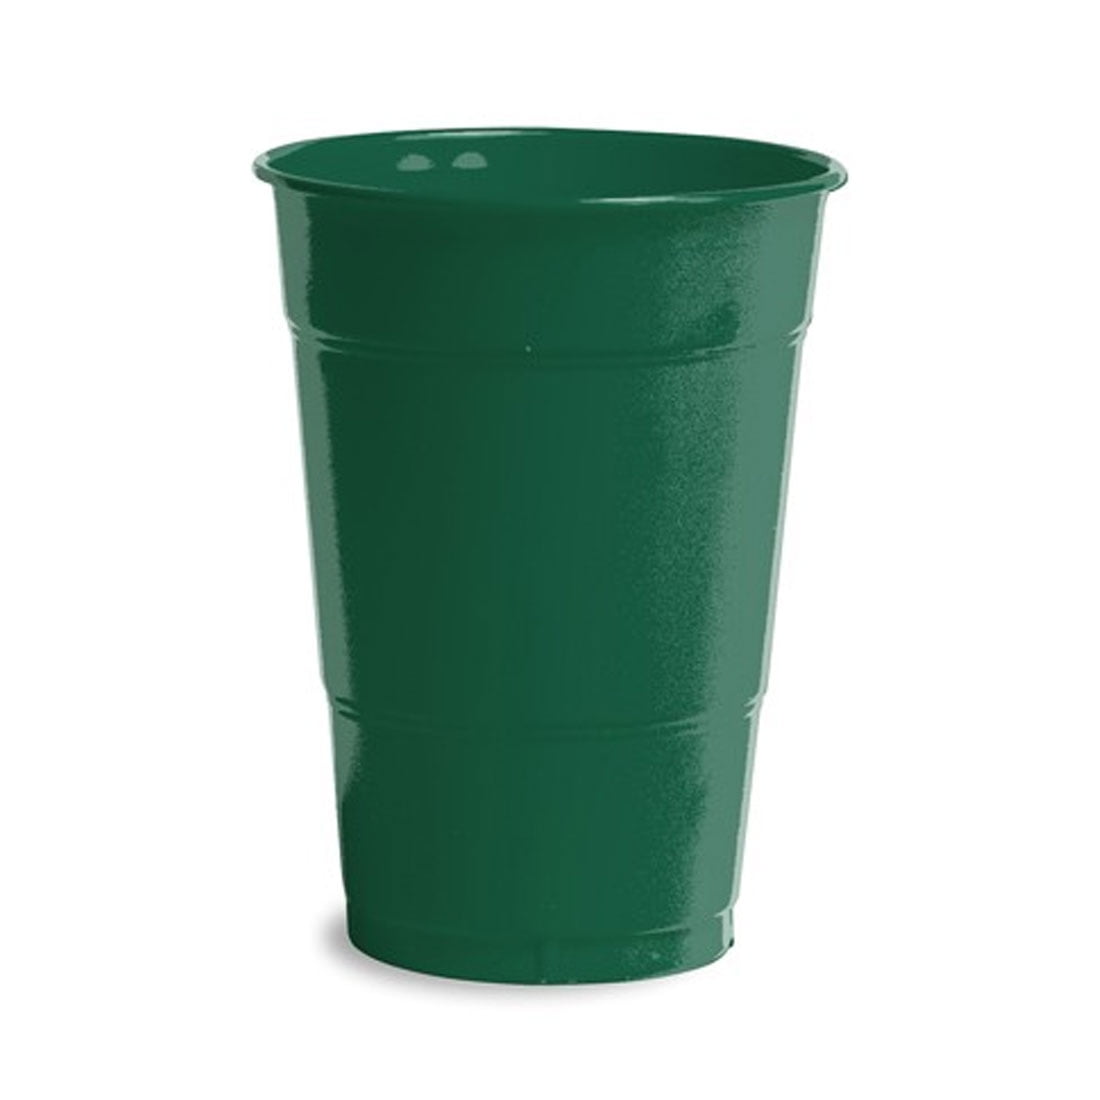 Signature Select 18 oz Green Plastic Party Cups (20 ct) Delivery - DoorDash